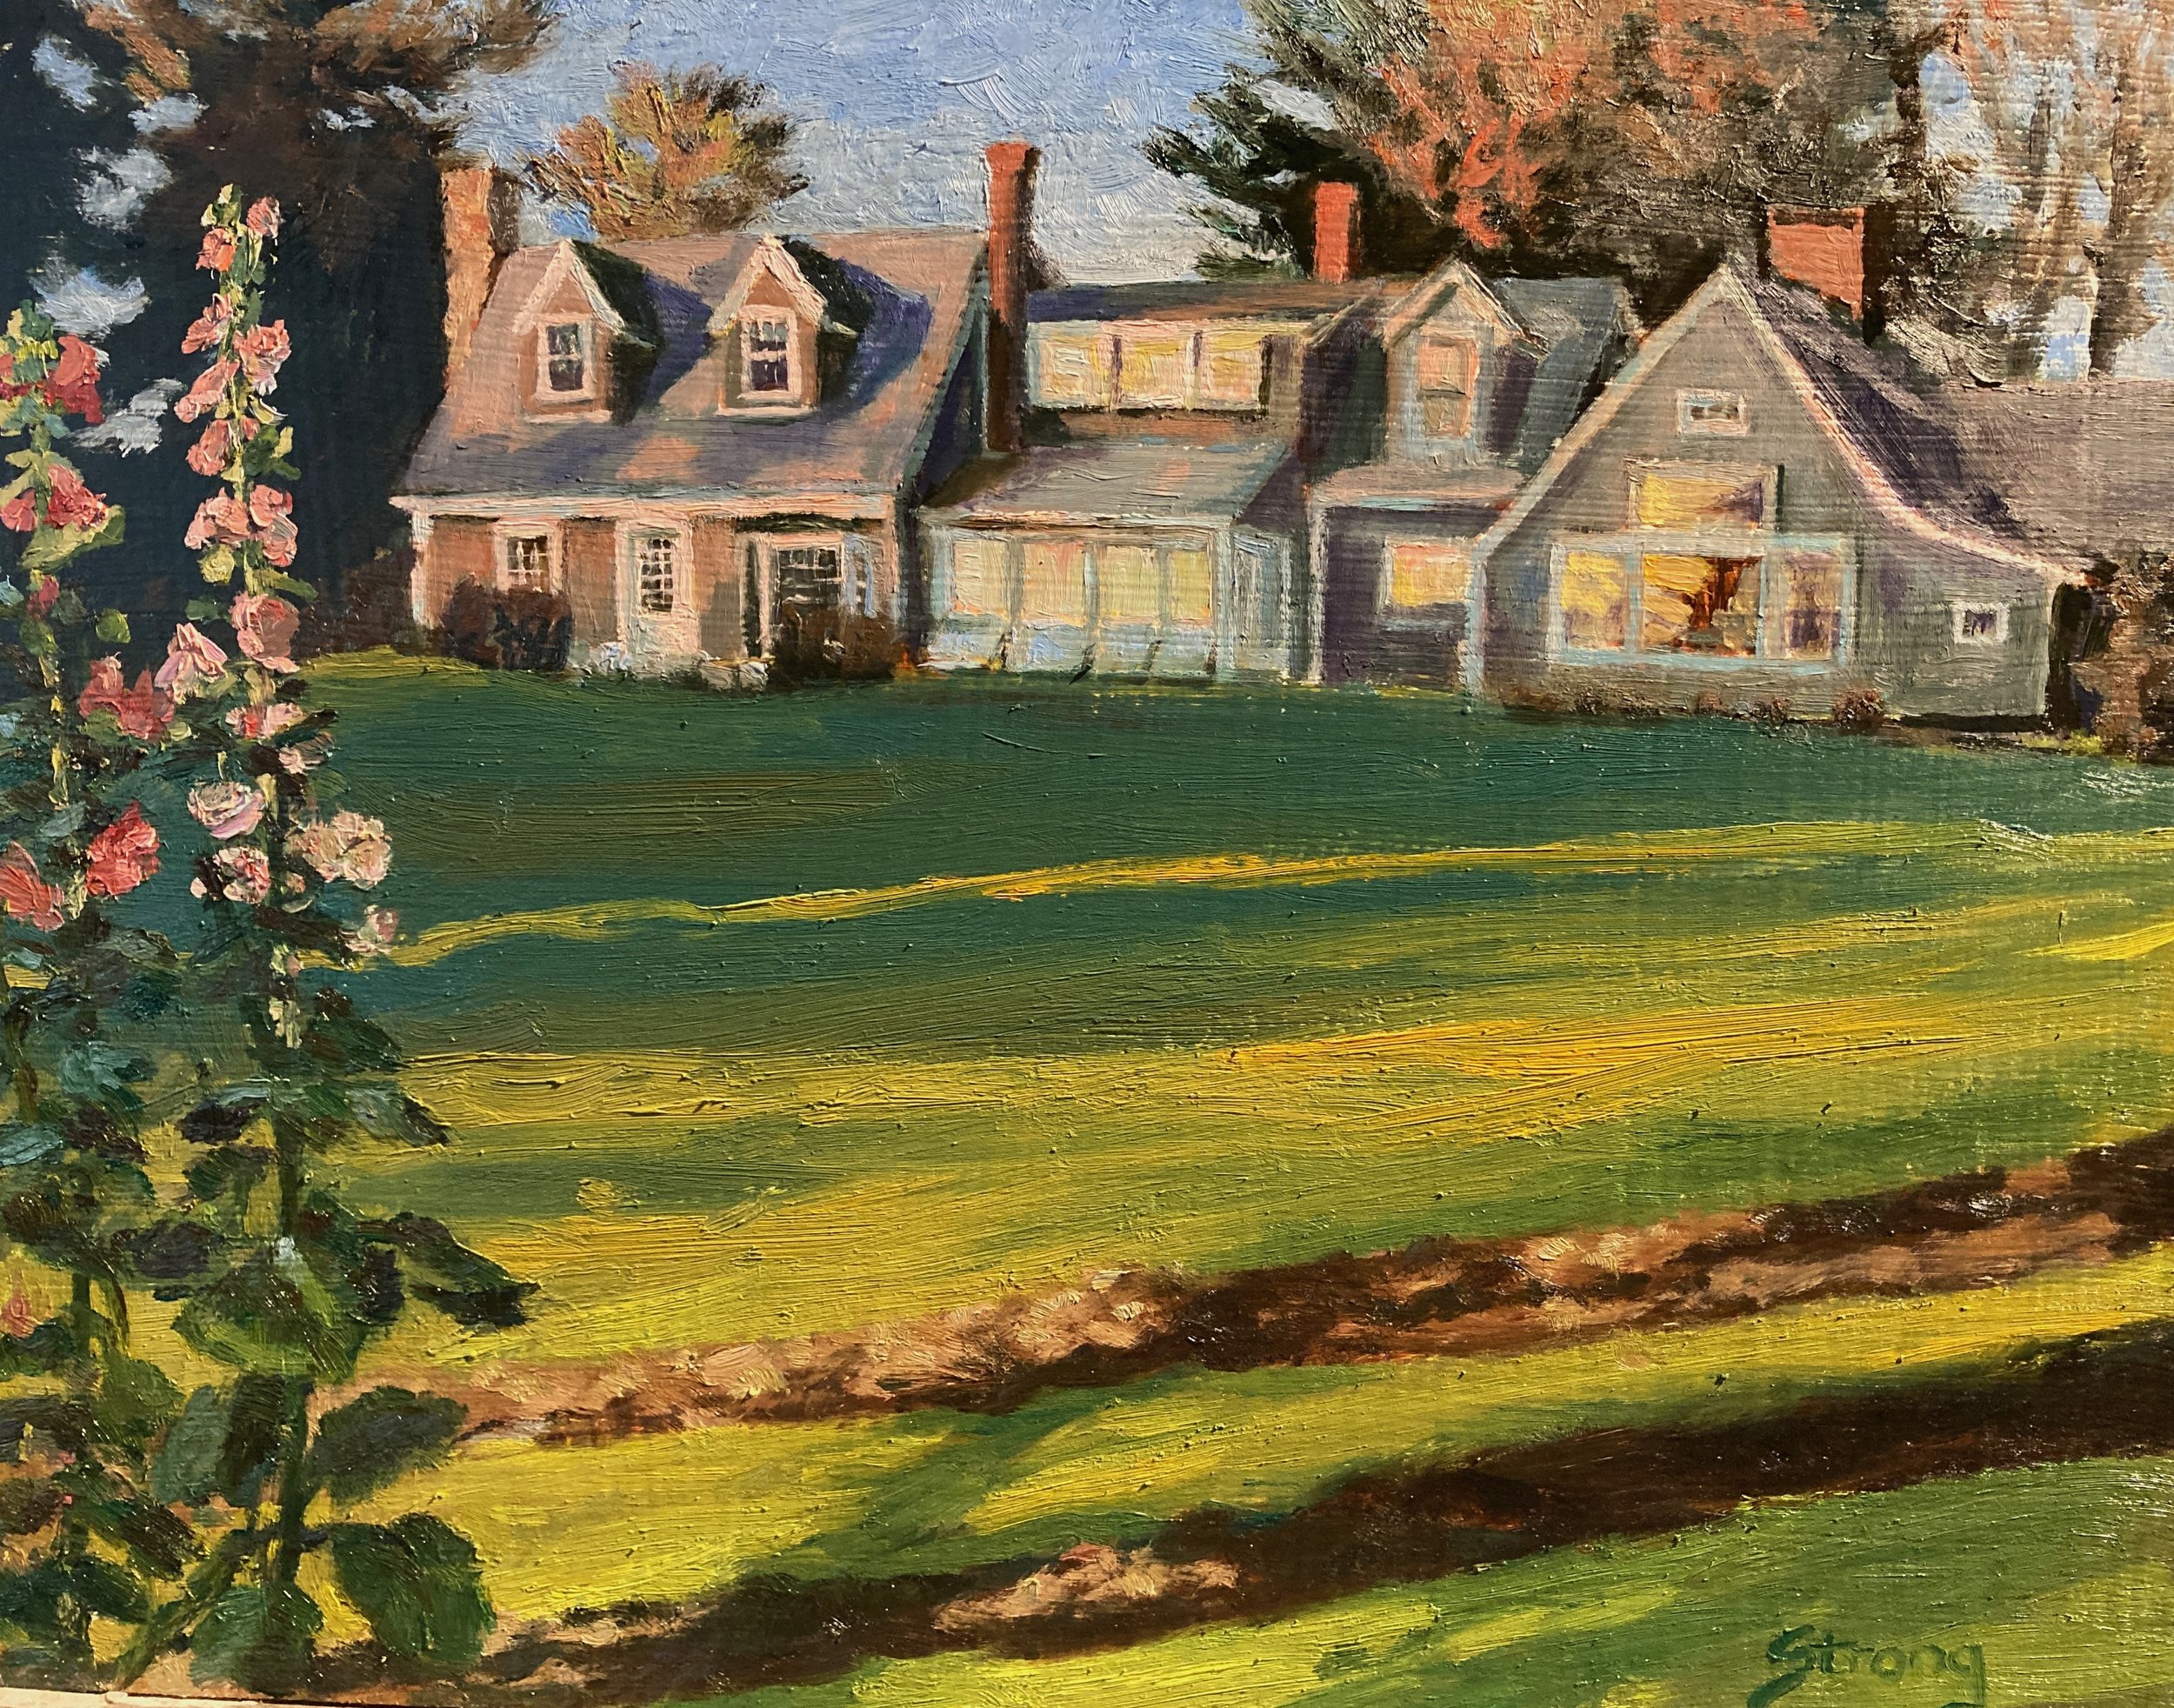 "Friendship Home", 11" x 14", oil on panel